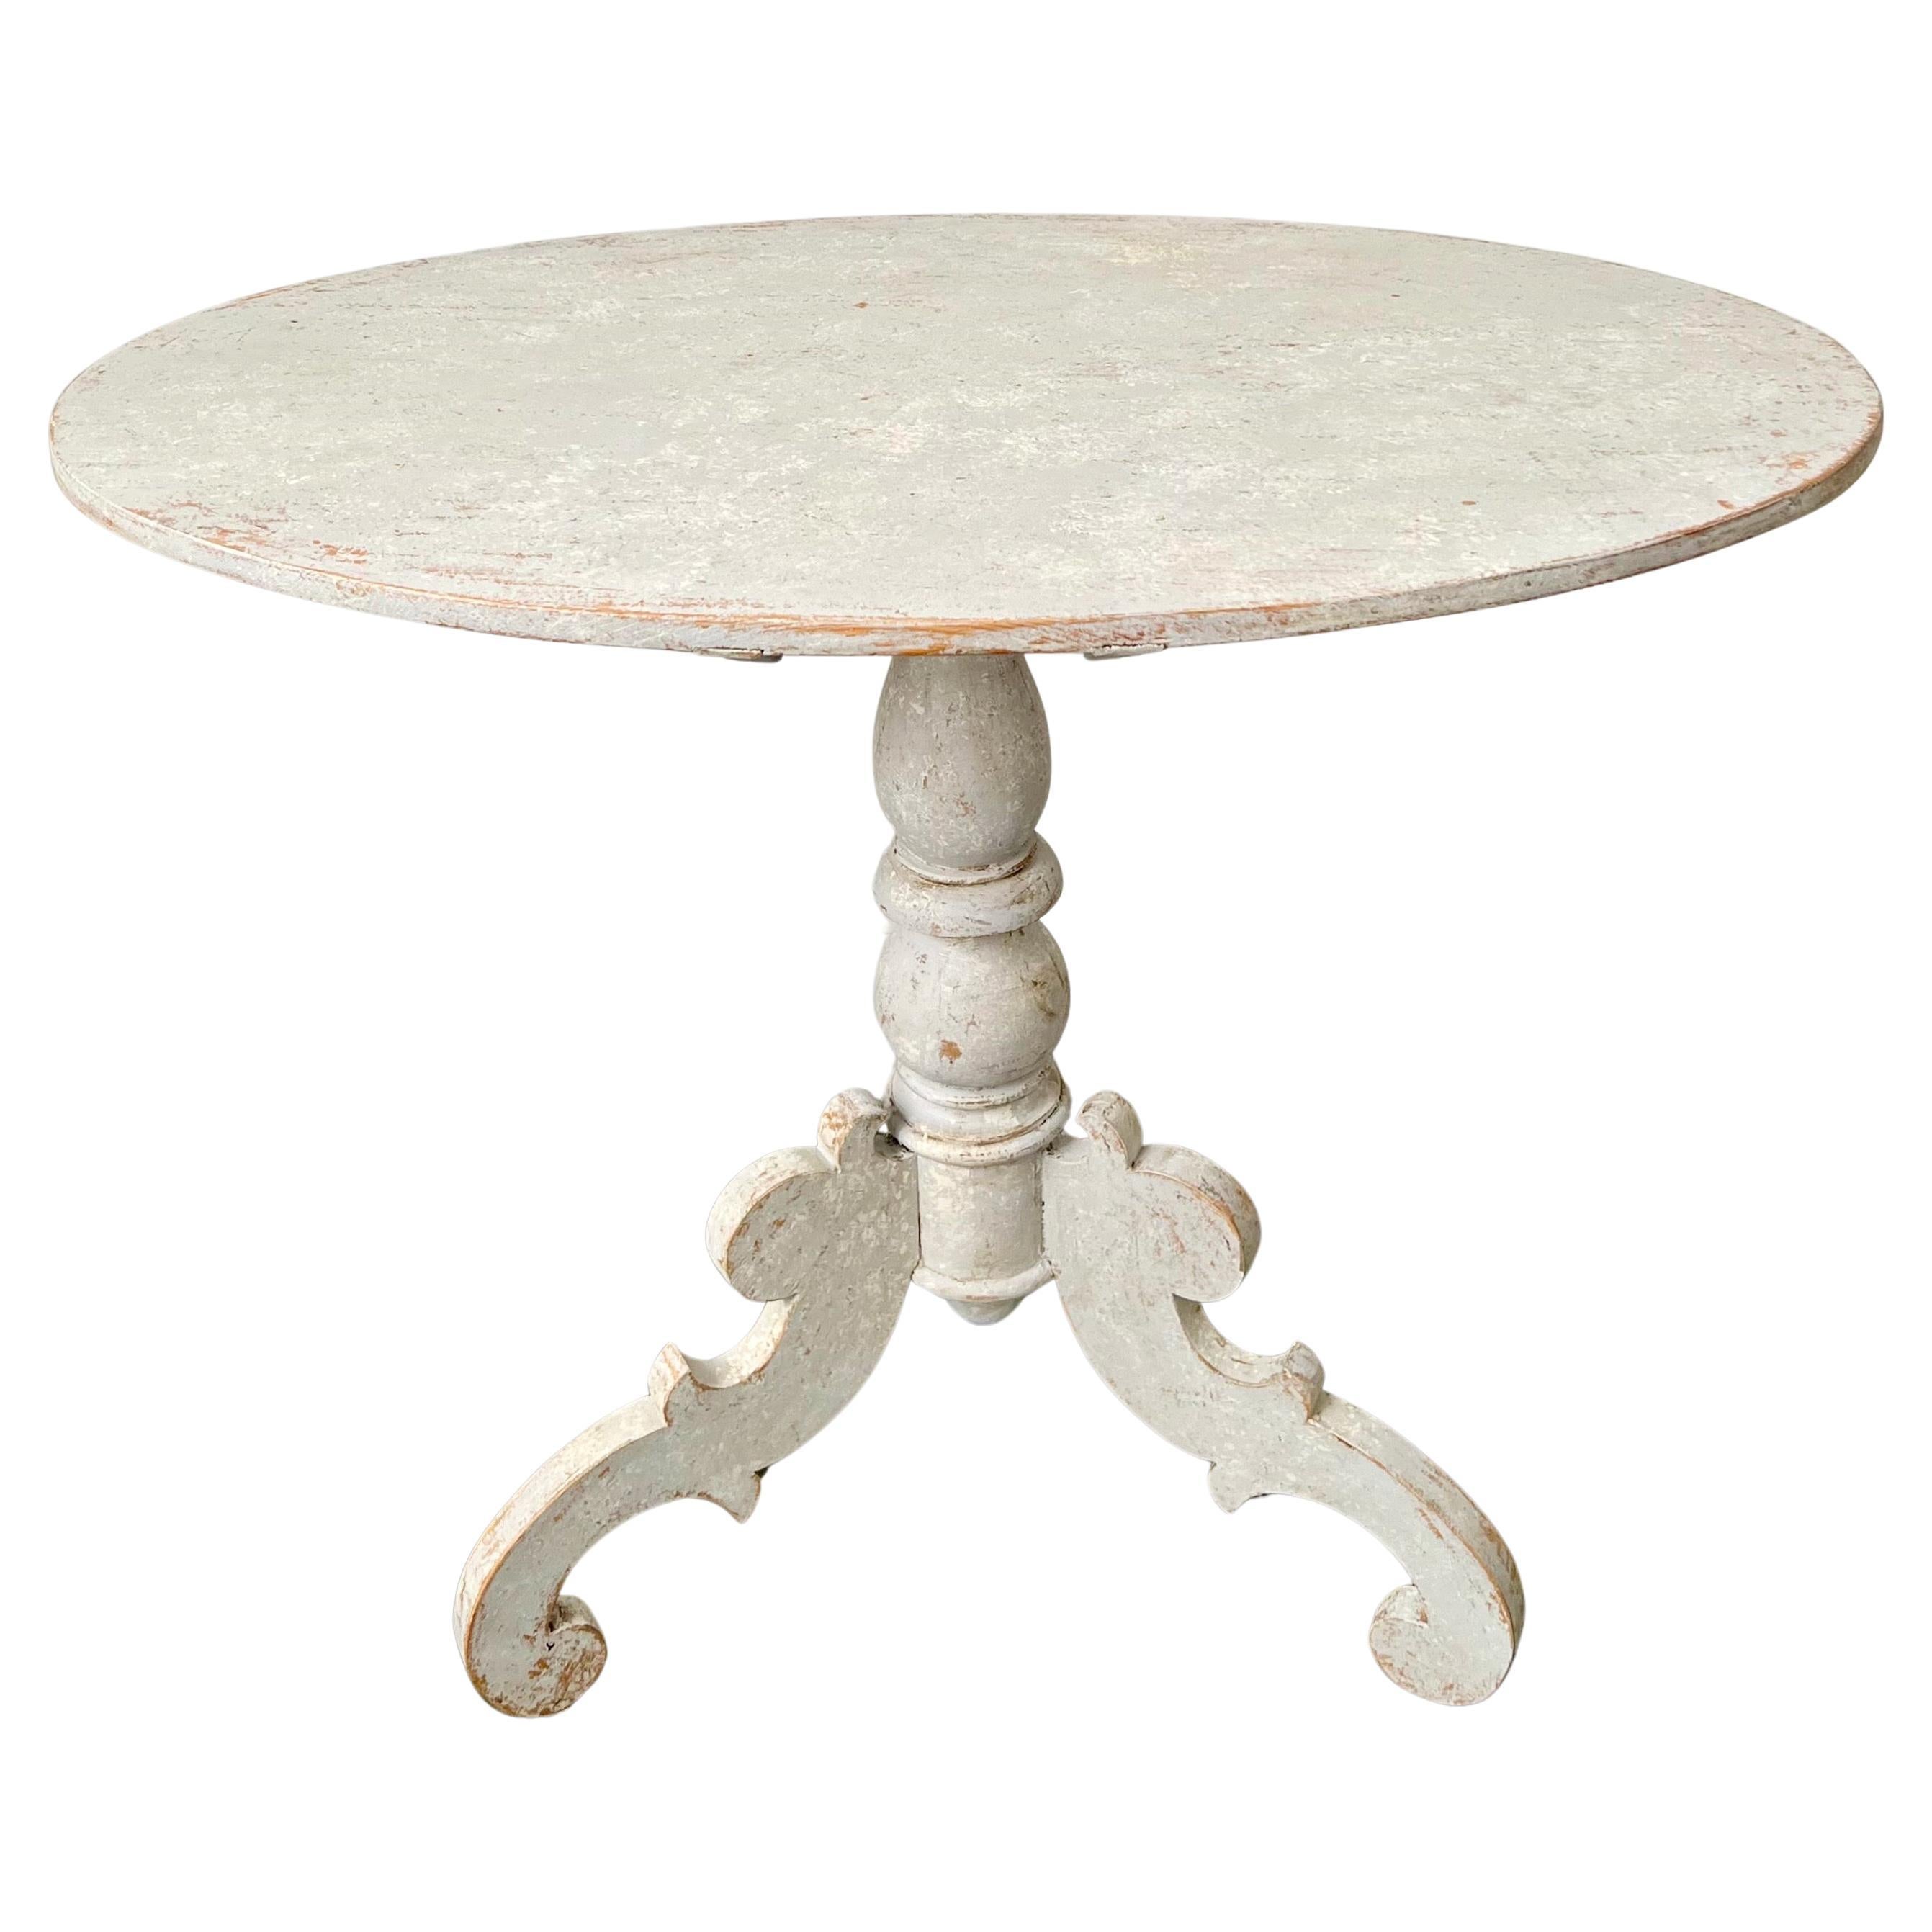 Swedish 1840’s Painted Wood Large Table with Oval Top and Pedestal Base For Sale